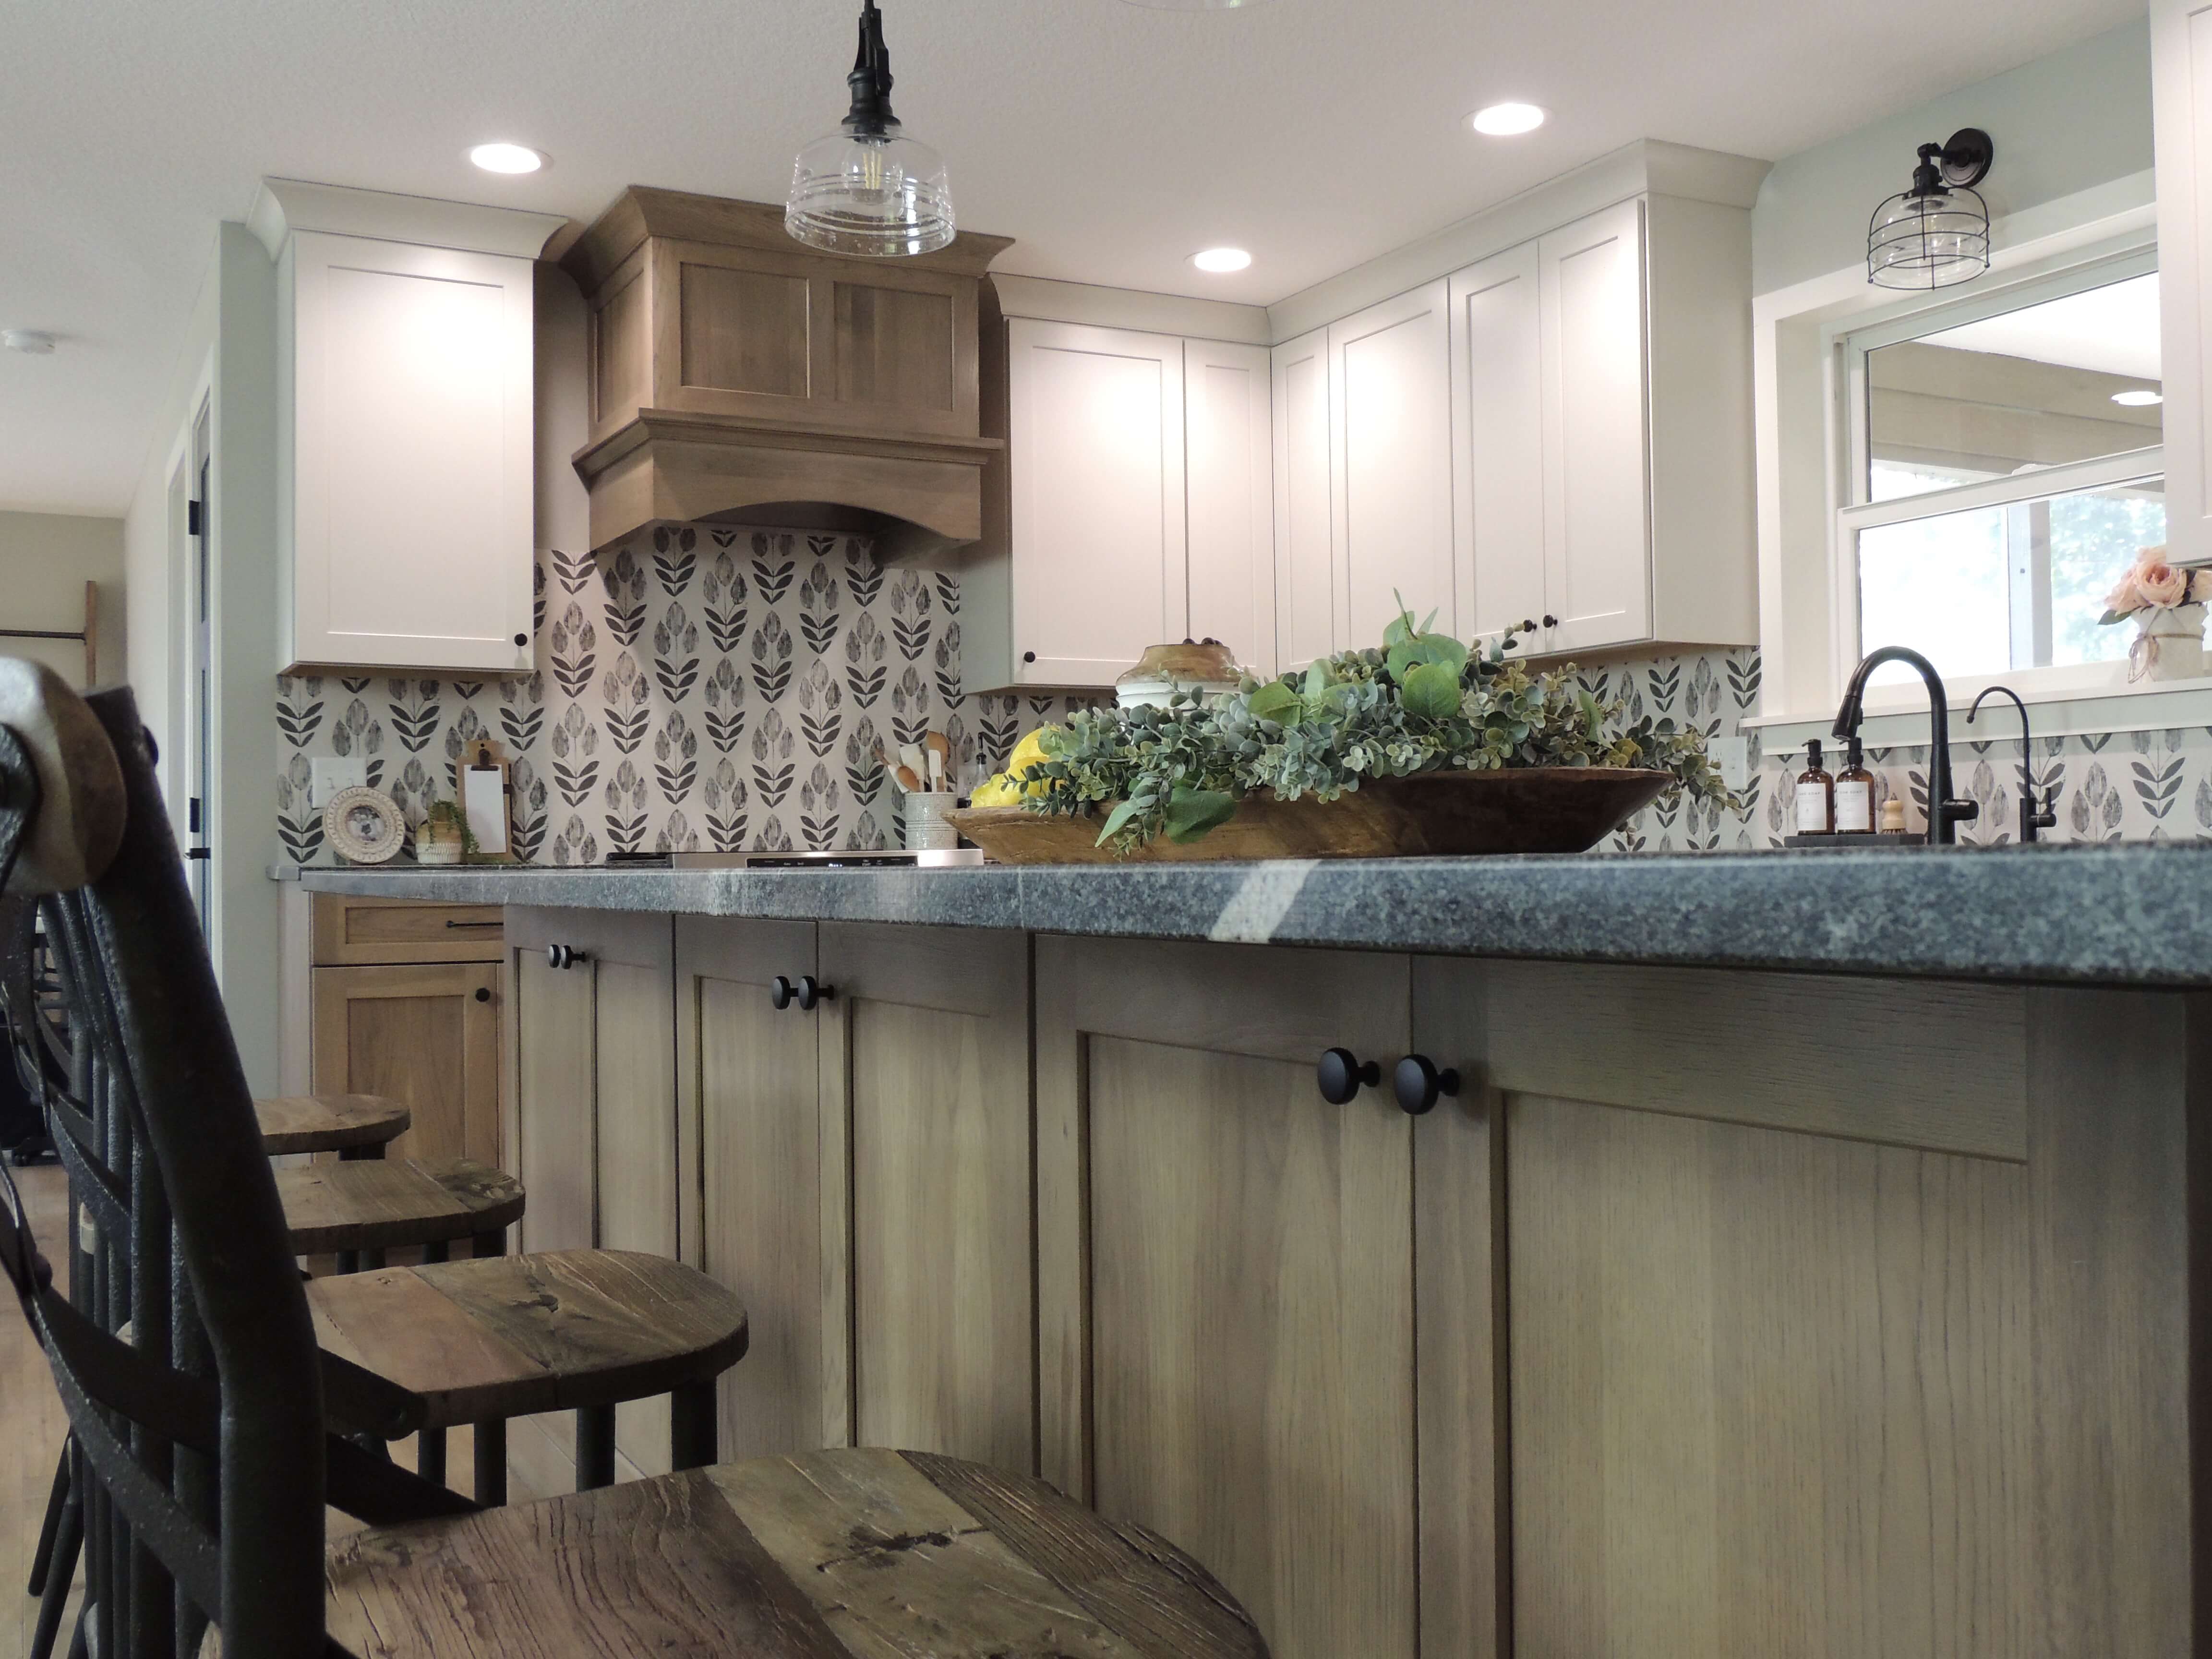 A view of the new remodeled kitchen from the kitchen island showing the contrasting wood hood and wall cabinets.